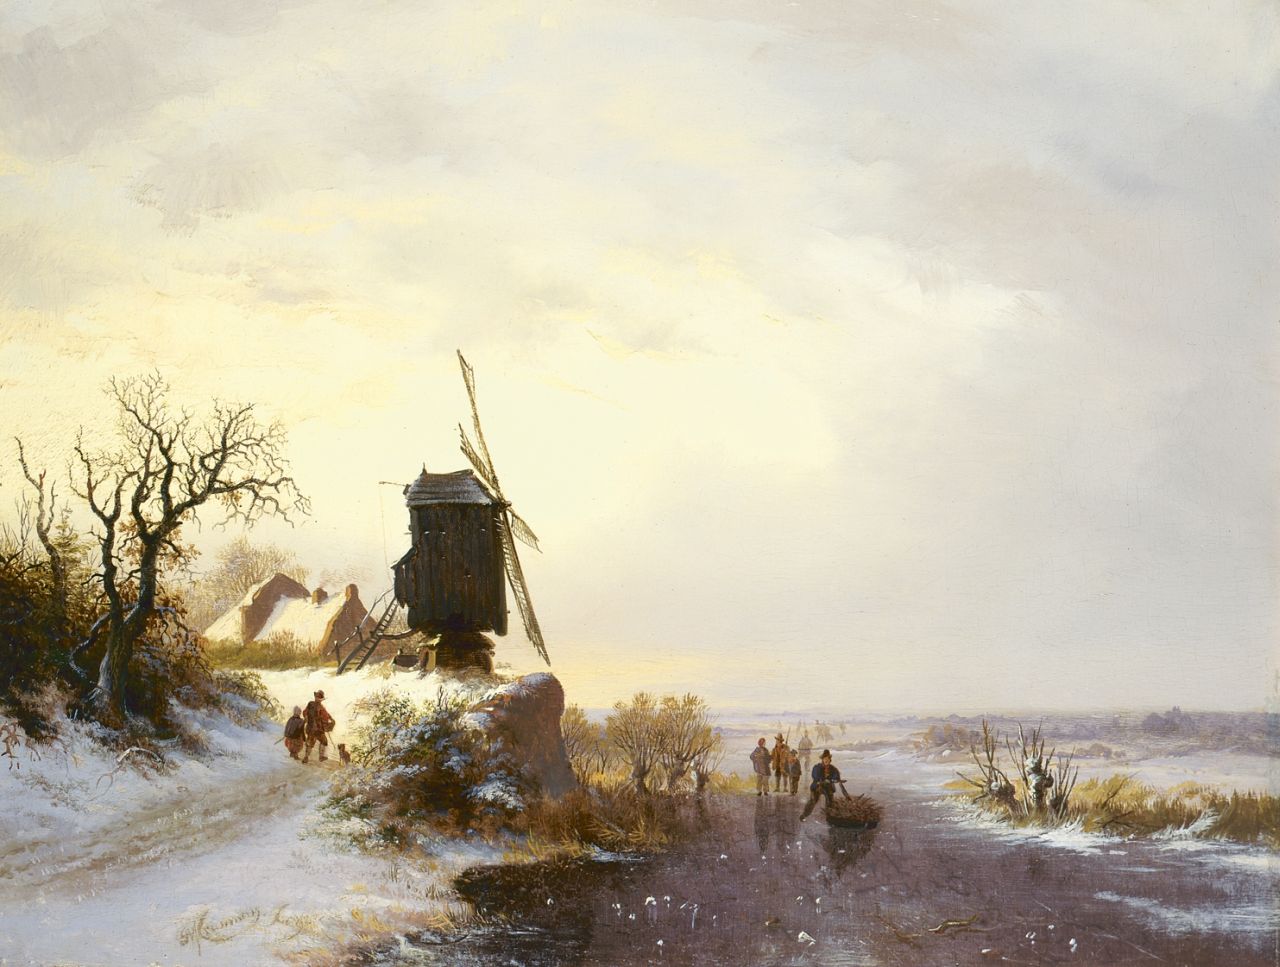 Kruseman F.M.  | Frederik Marinus Kruseman, A winter landscape with a windmill, oil on panel 33.5 x 44.0 cm, signed l.l. and dated '42